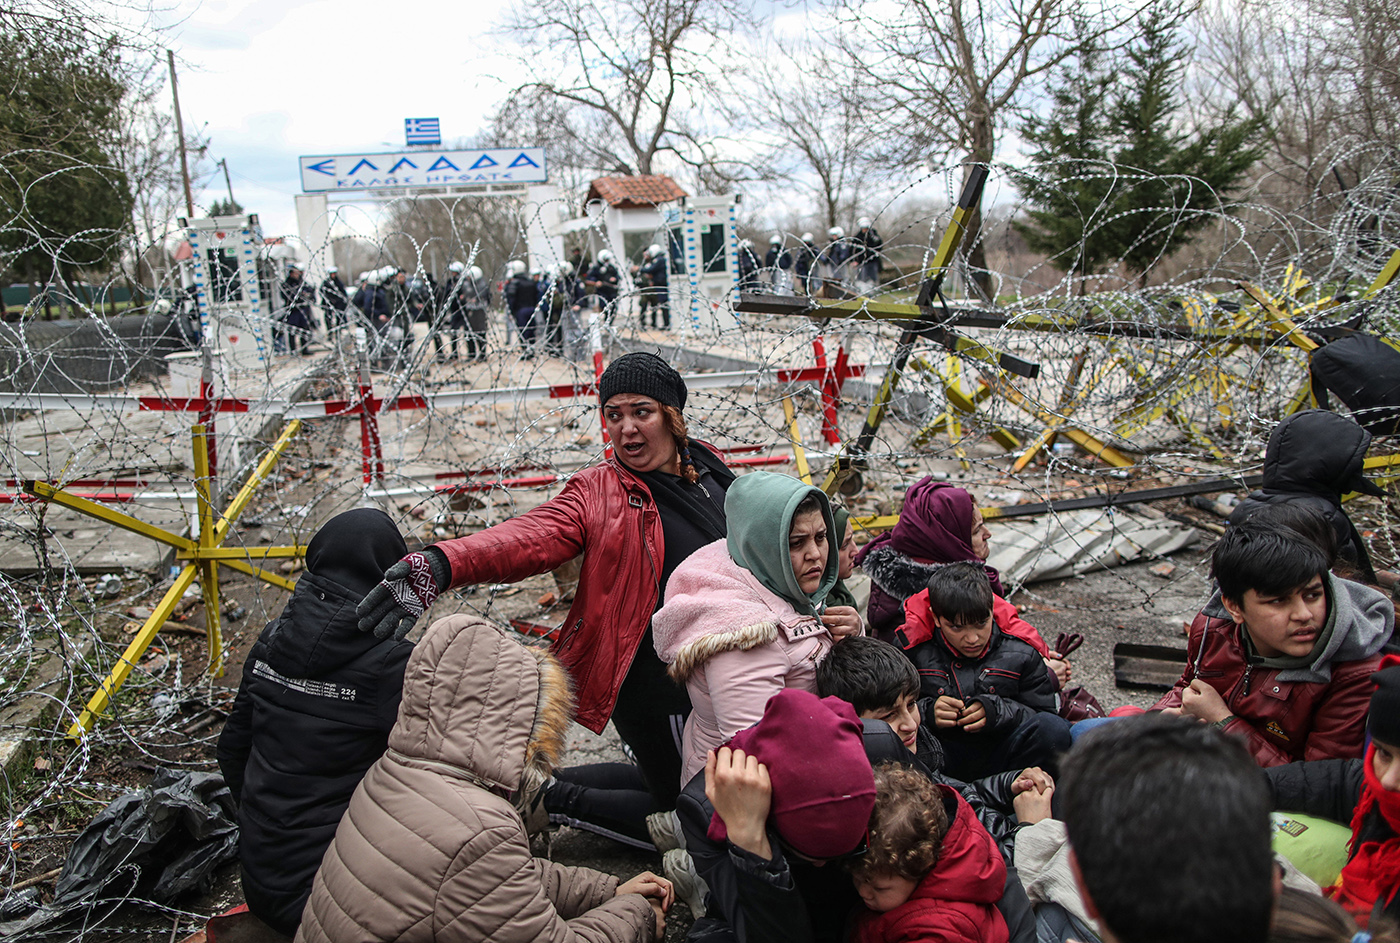 Refugees have some rest before attempting to pass the closed-off Turkish-Greek border and try to enter Europe, Edirne, Turkey, 29 February 2020, while Greek border officials look on from the Greek side. 